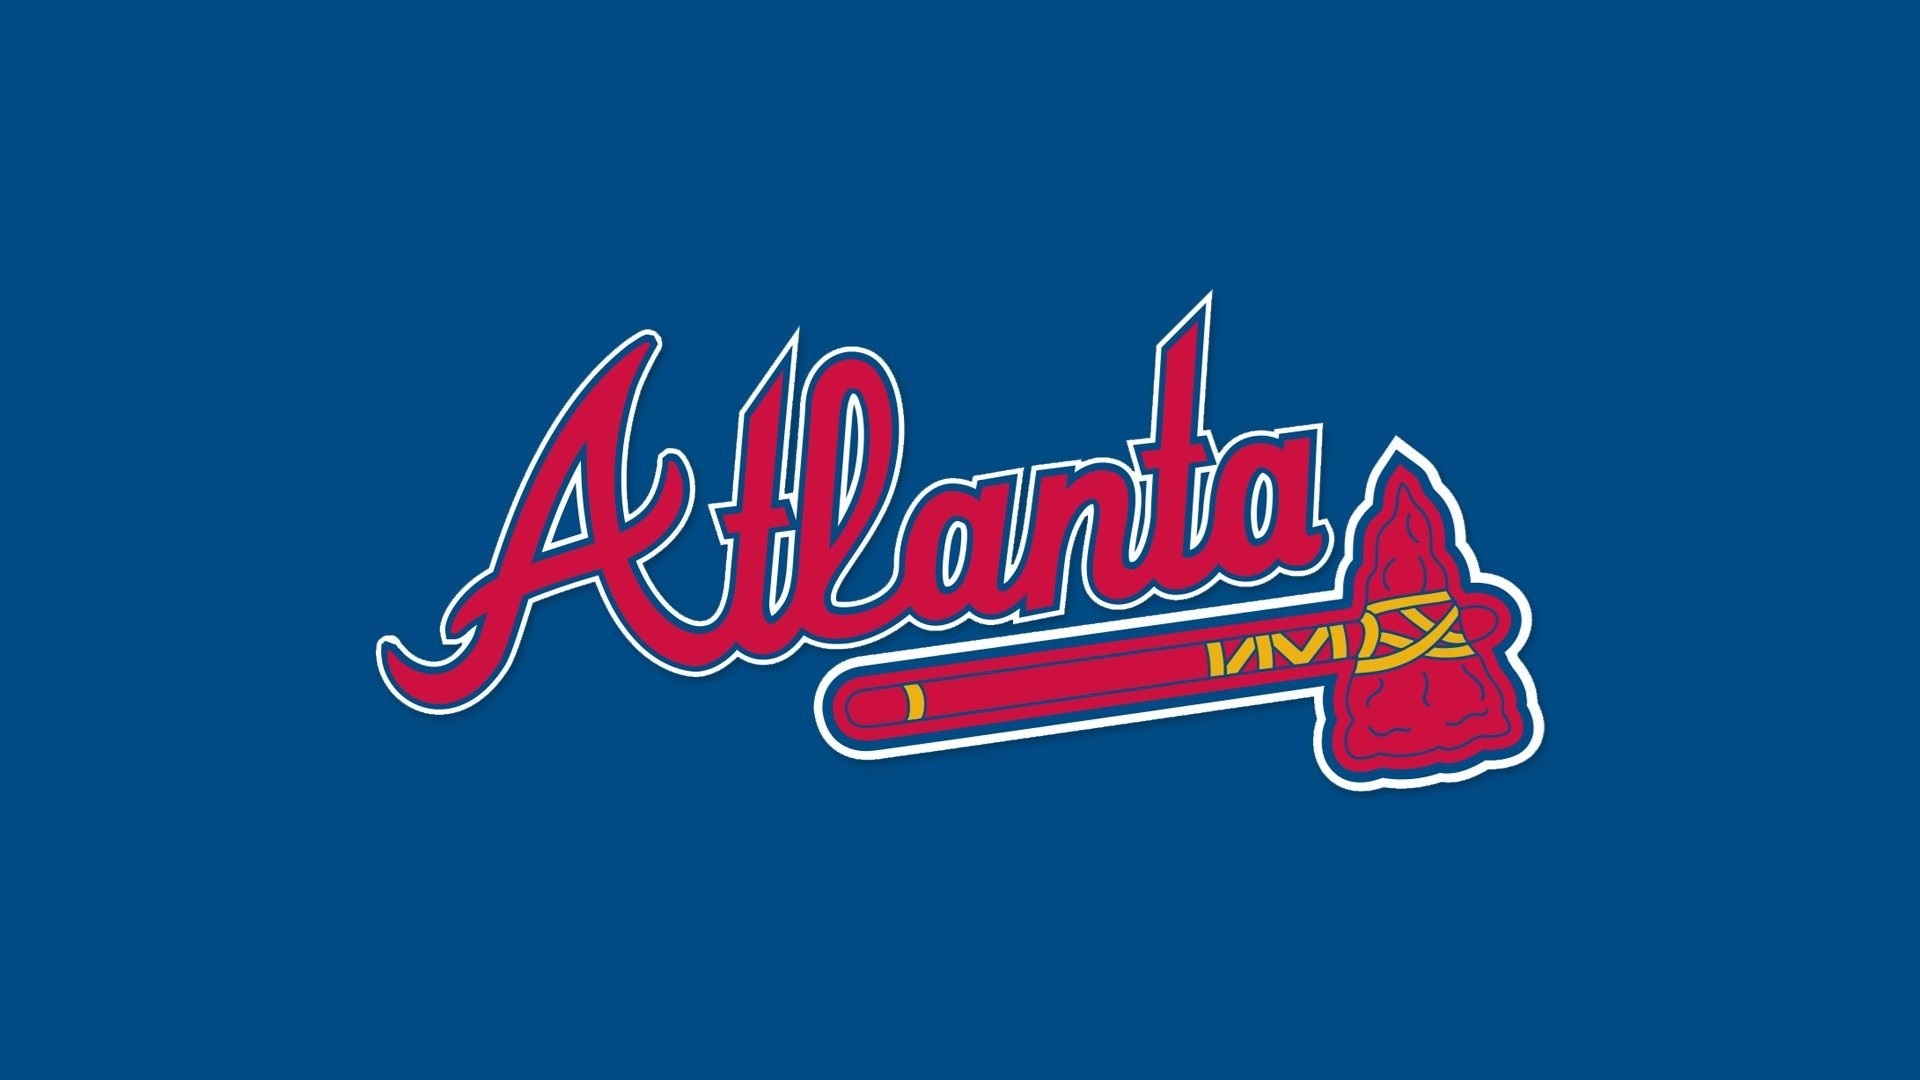 Atlanta Braves HD Wallpapers with high-resolution 1920x1080 pixel. You can use this wallpaper for Mac Desktop Wallpaper, Laptop Screensavers, Android Wallpapers, Tablet or iPhone Home Screen and another mobile phone device